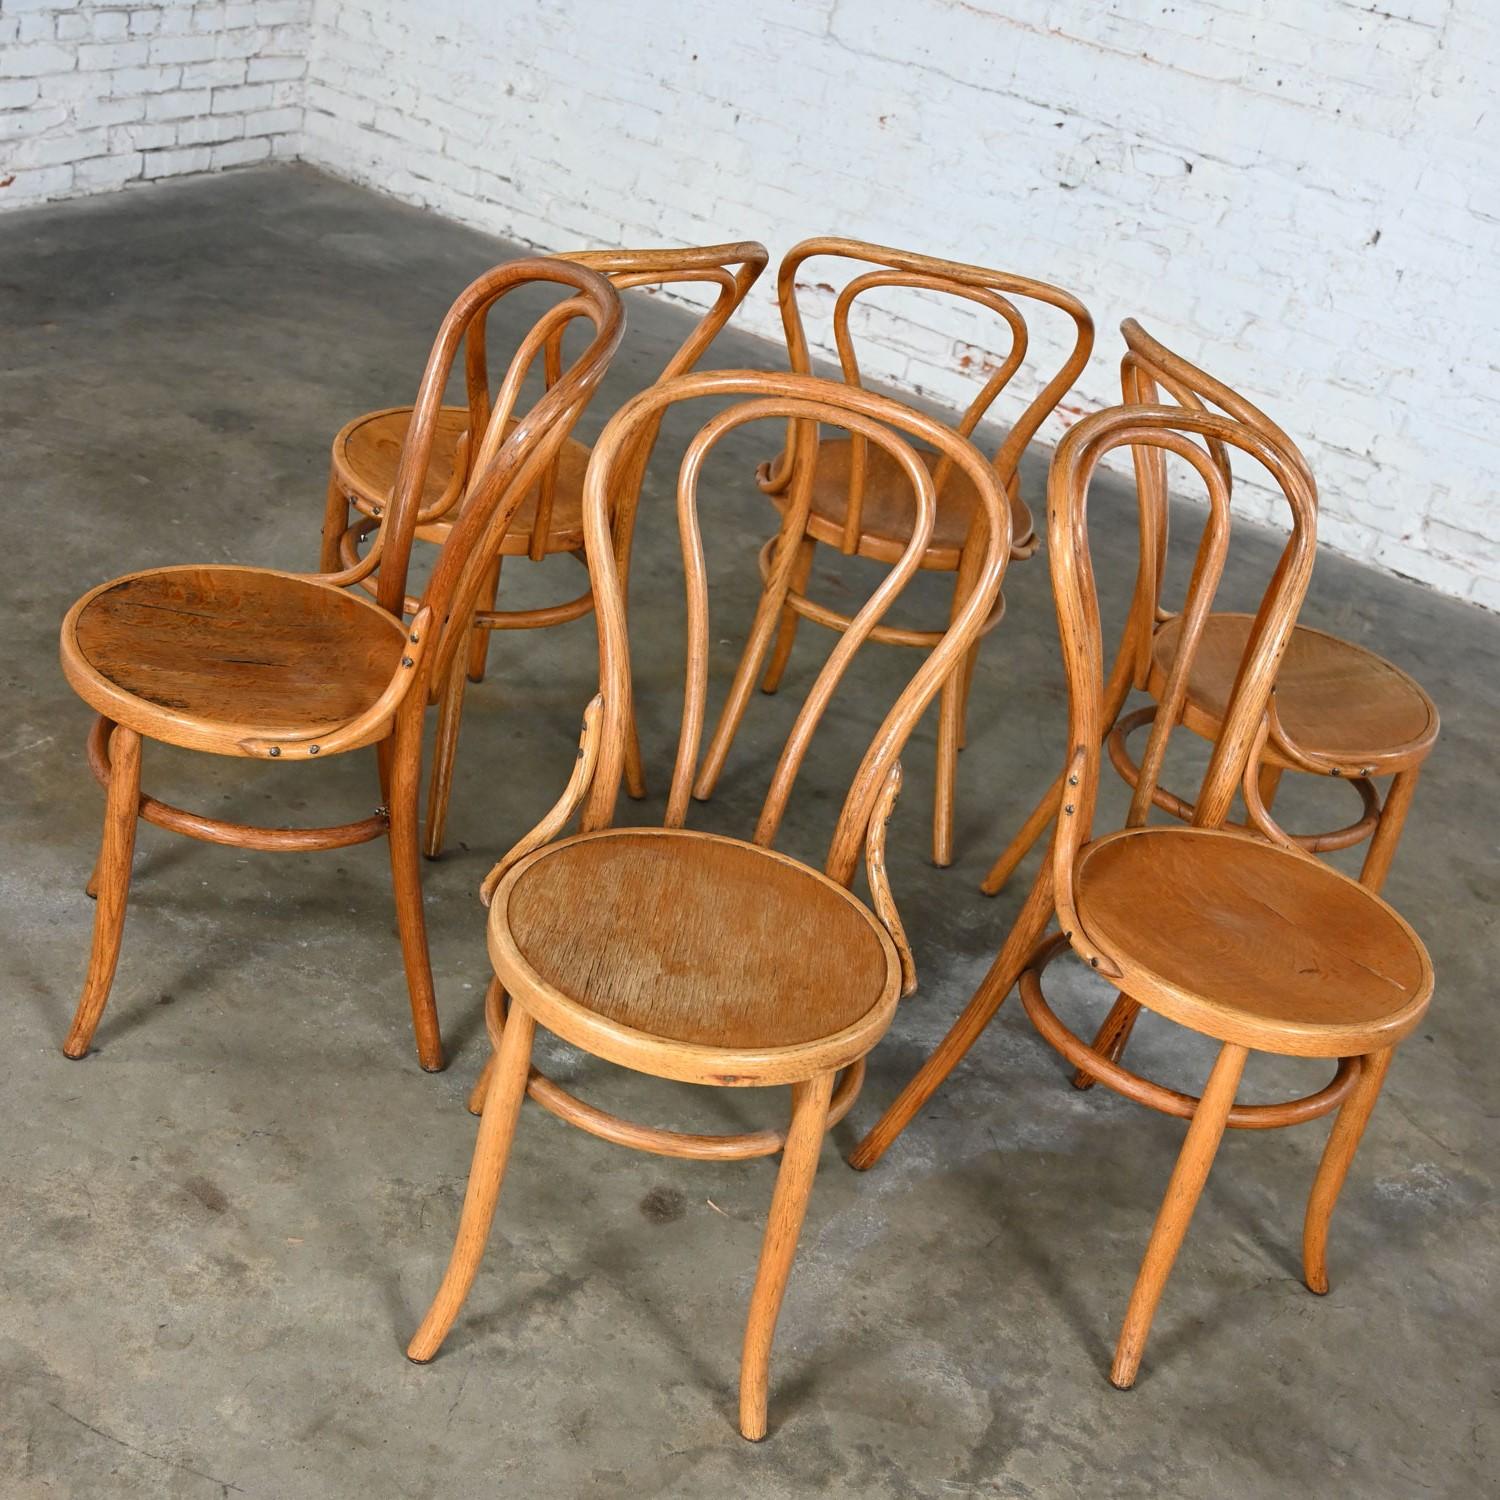 Bauhaus Oak Bentwood Chairs Attributed to Thonet #18 Café Chair Set of 6 For Sale 10